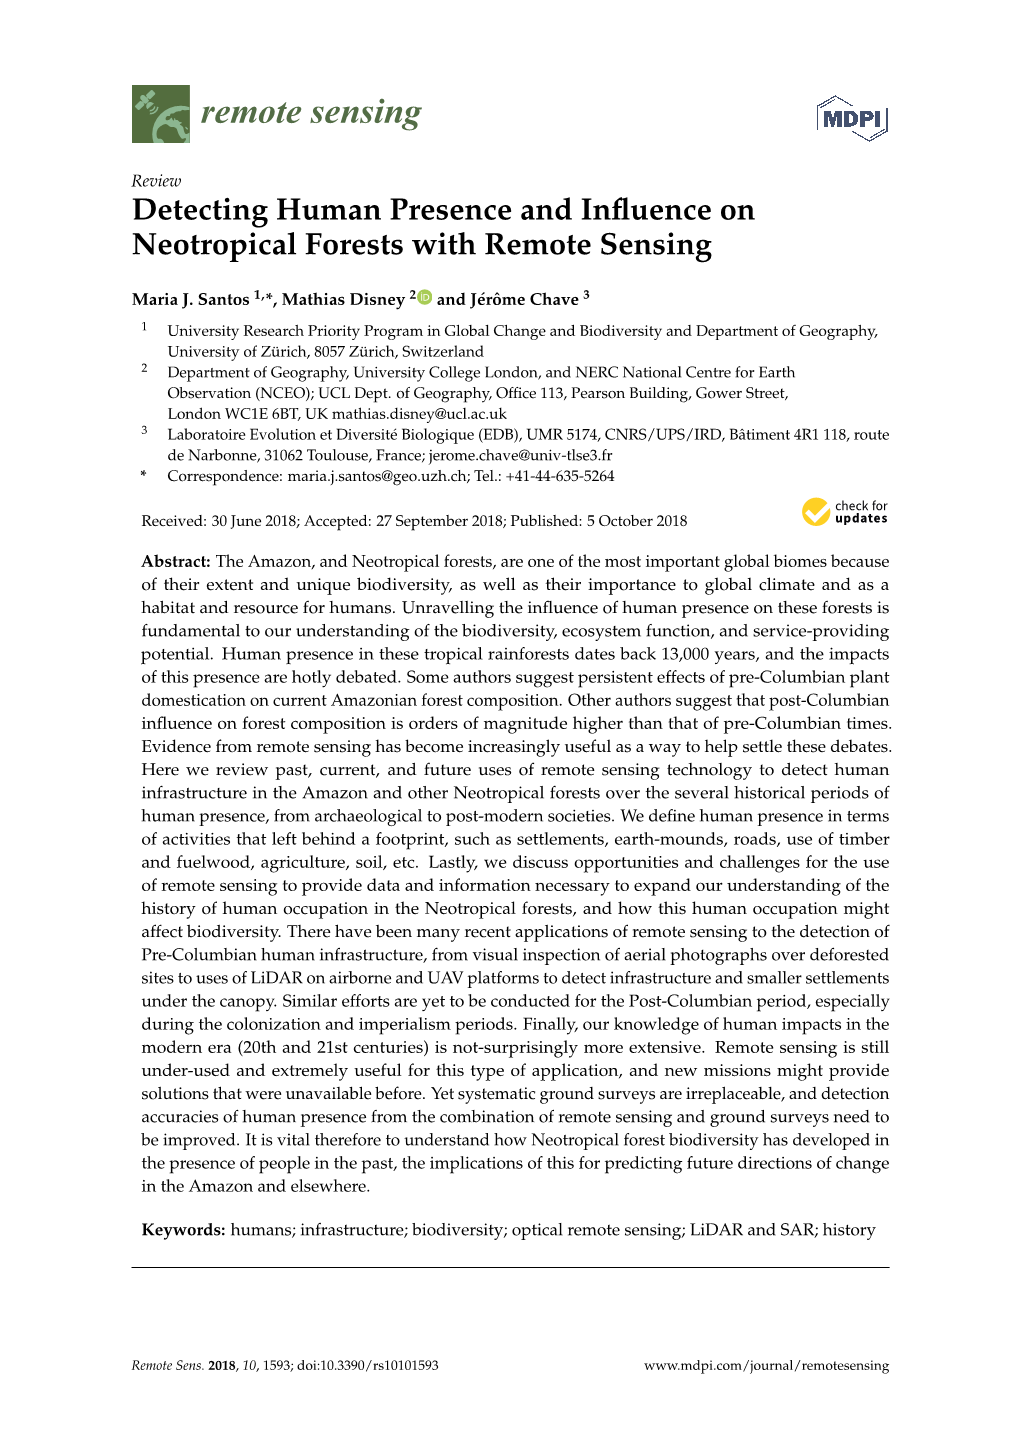 Detecting Human Presence and Influence on Neotropical Forests